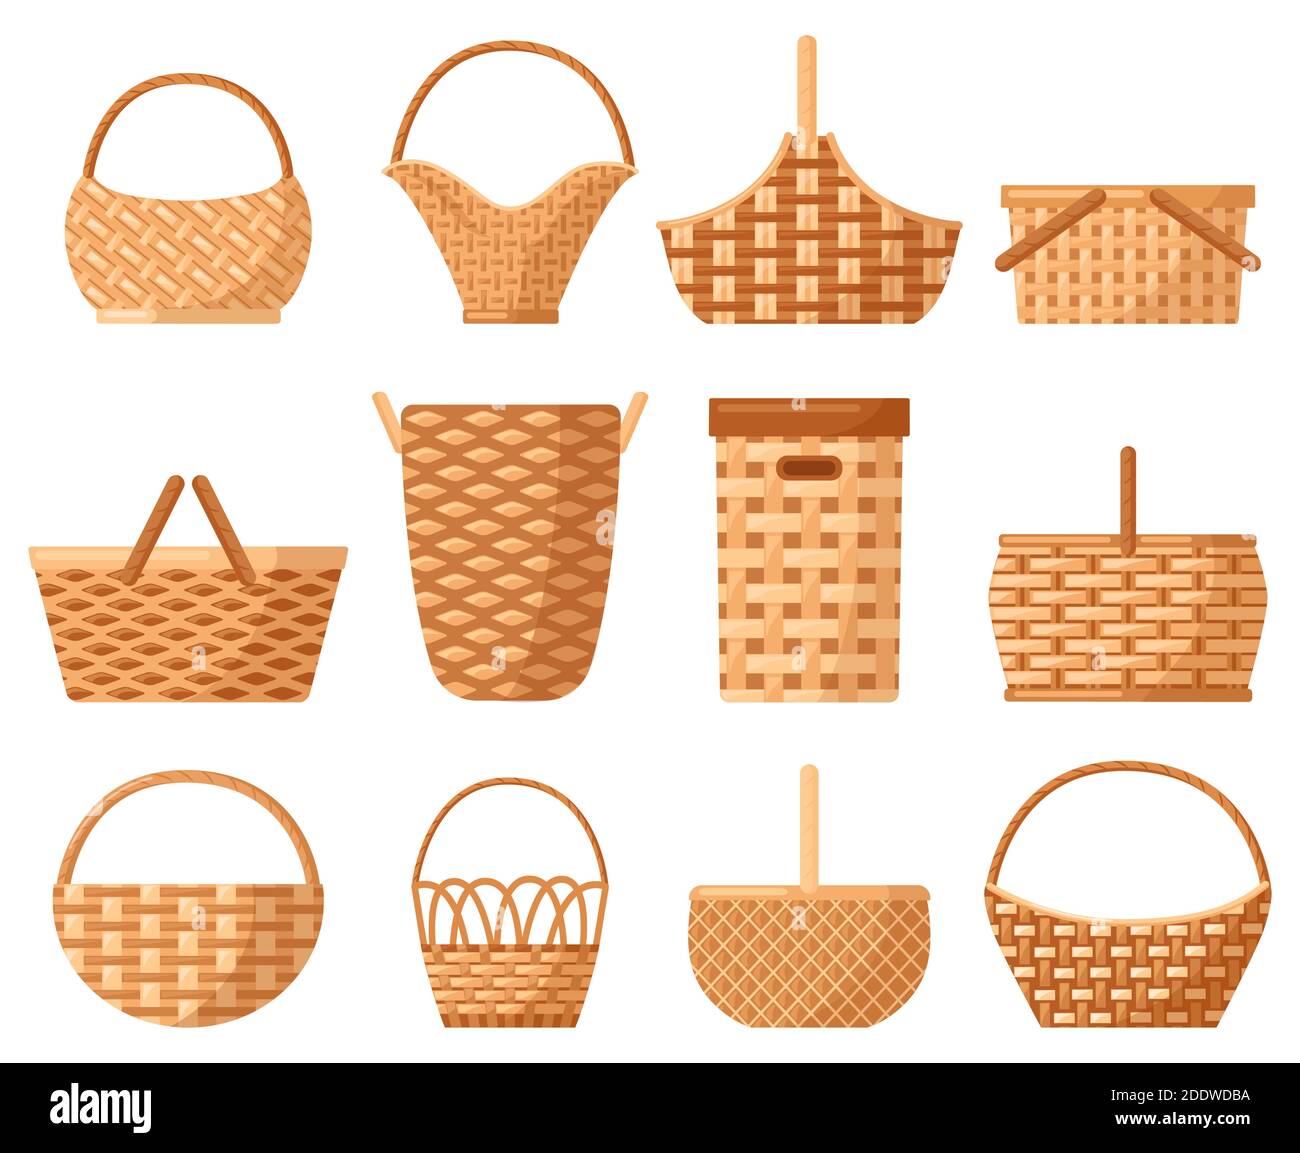 Wicker decorative basket. Traditional picnic willow basket with handle,  baskets for outdoor dining. Wicker hampers vector illustration set Stock  Vector Image & Art - Alamy